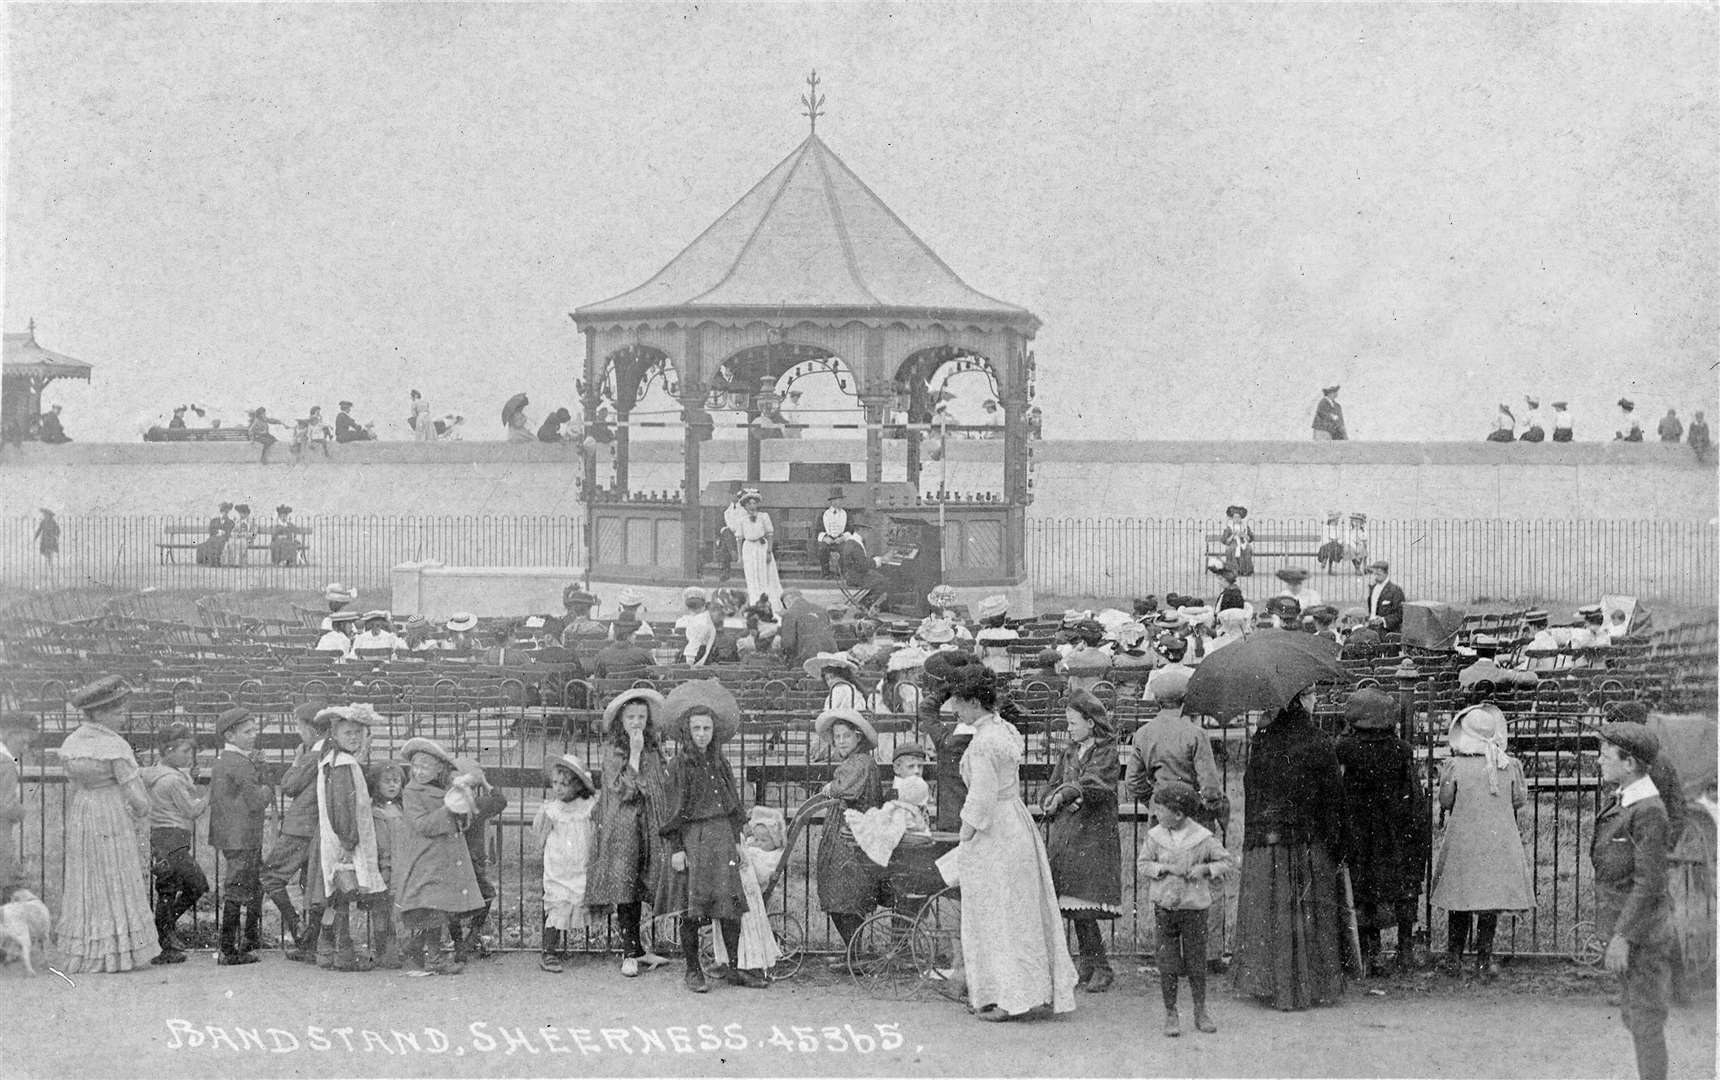 The old bandstand in Beachfields, Sheerness, was a popular attraction years ago